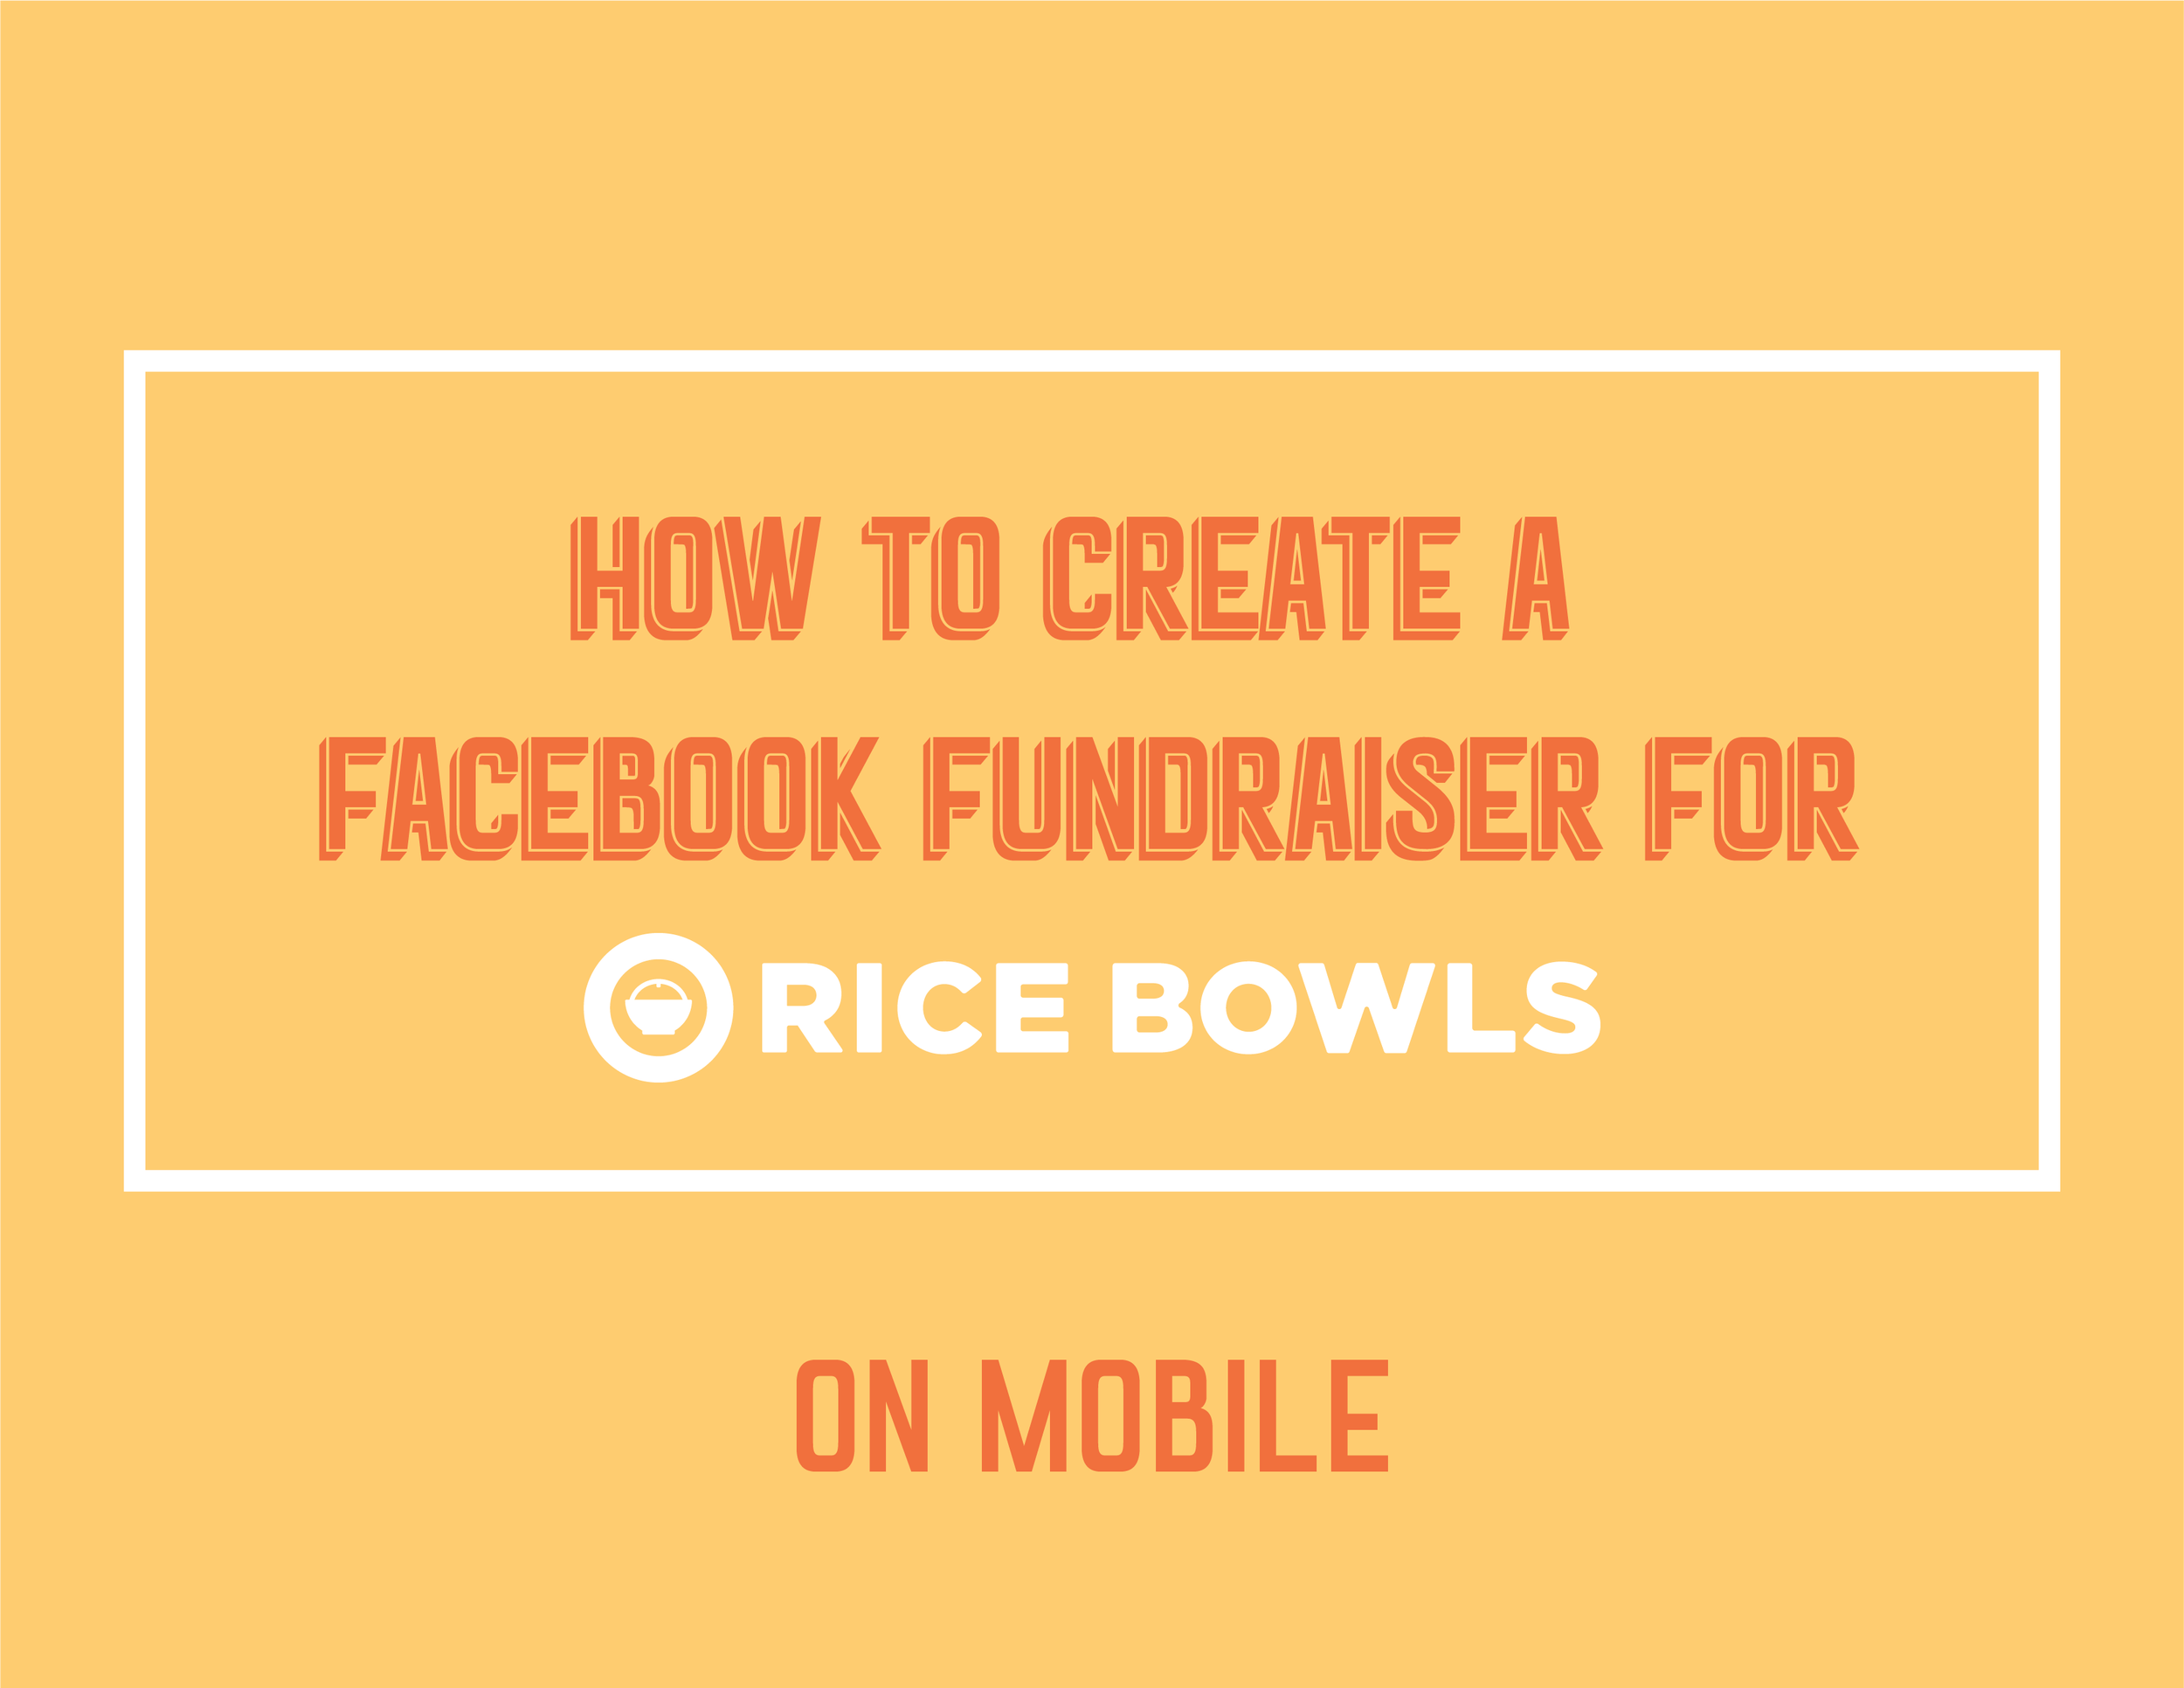 fb-fundraiser-guide-13.png